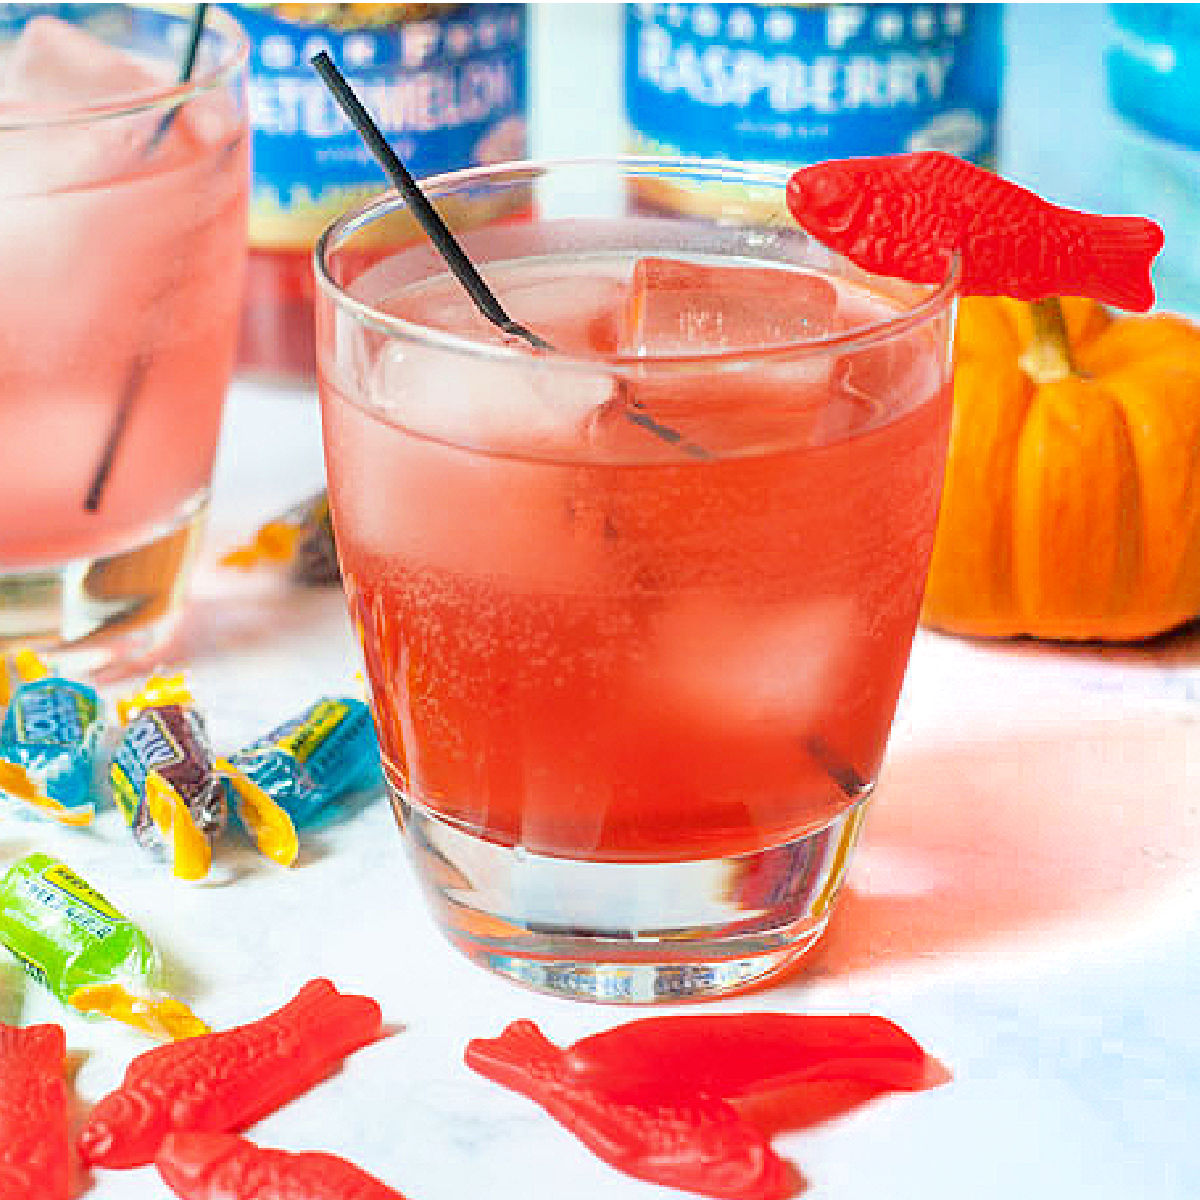 Swedish fish keto Halloween candy drinks with scattered candy Swedish fish and bottles in the background